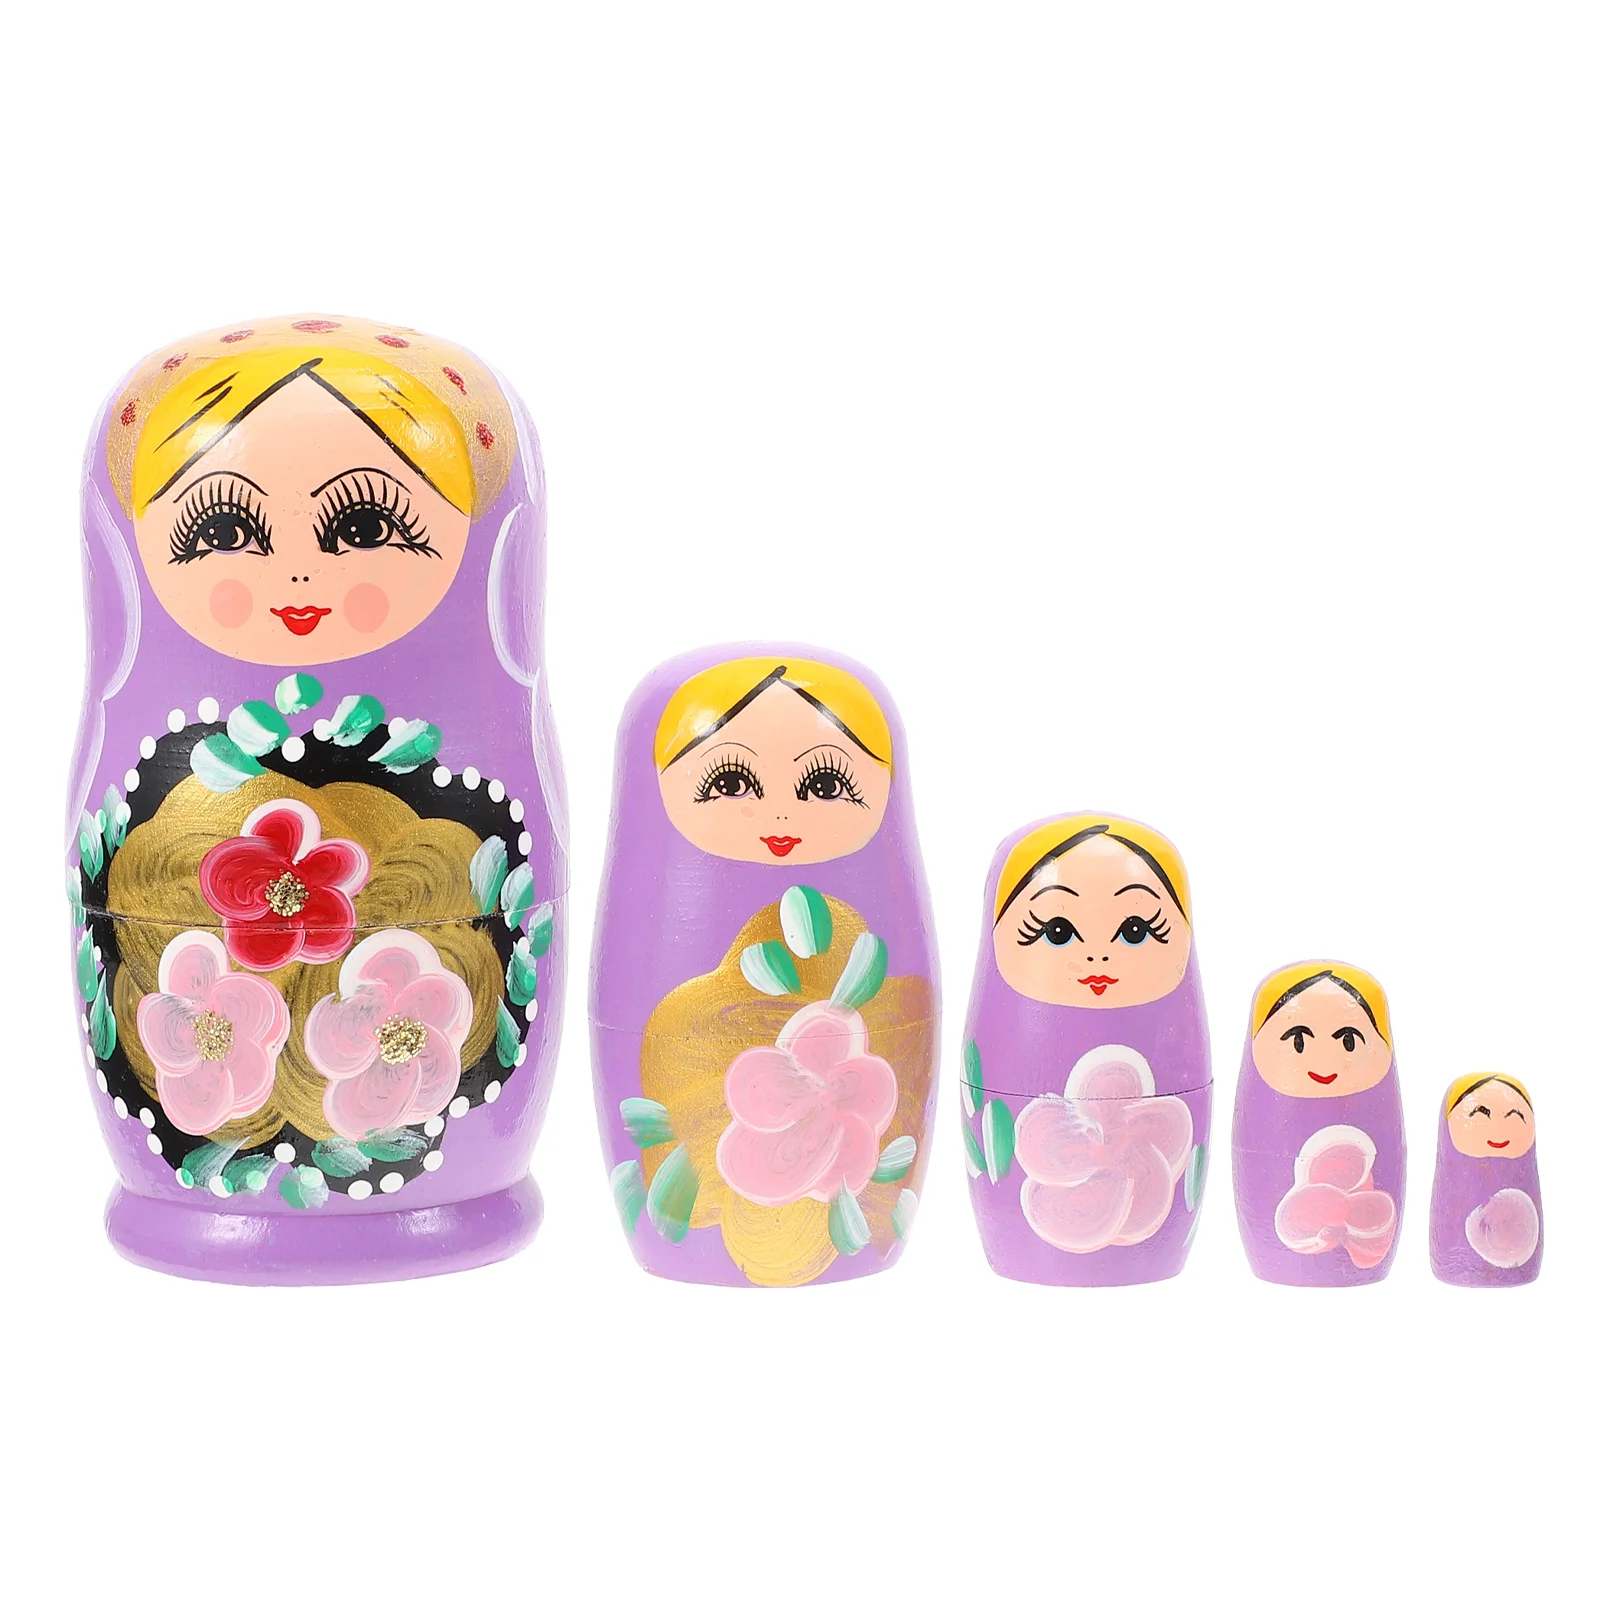 

5 Pcs Matryoshka Table Decorations Adorable Painted Stacking Dolls Decorate Nesting Wooden Creative Toys Russian Travel Home